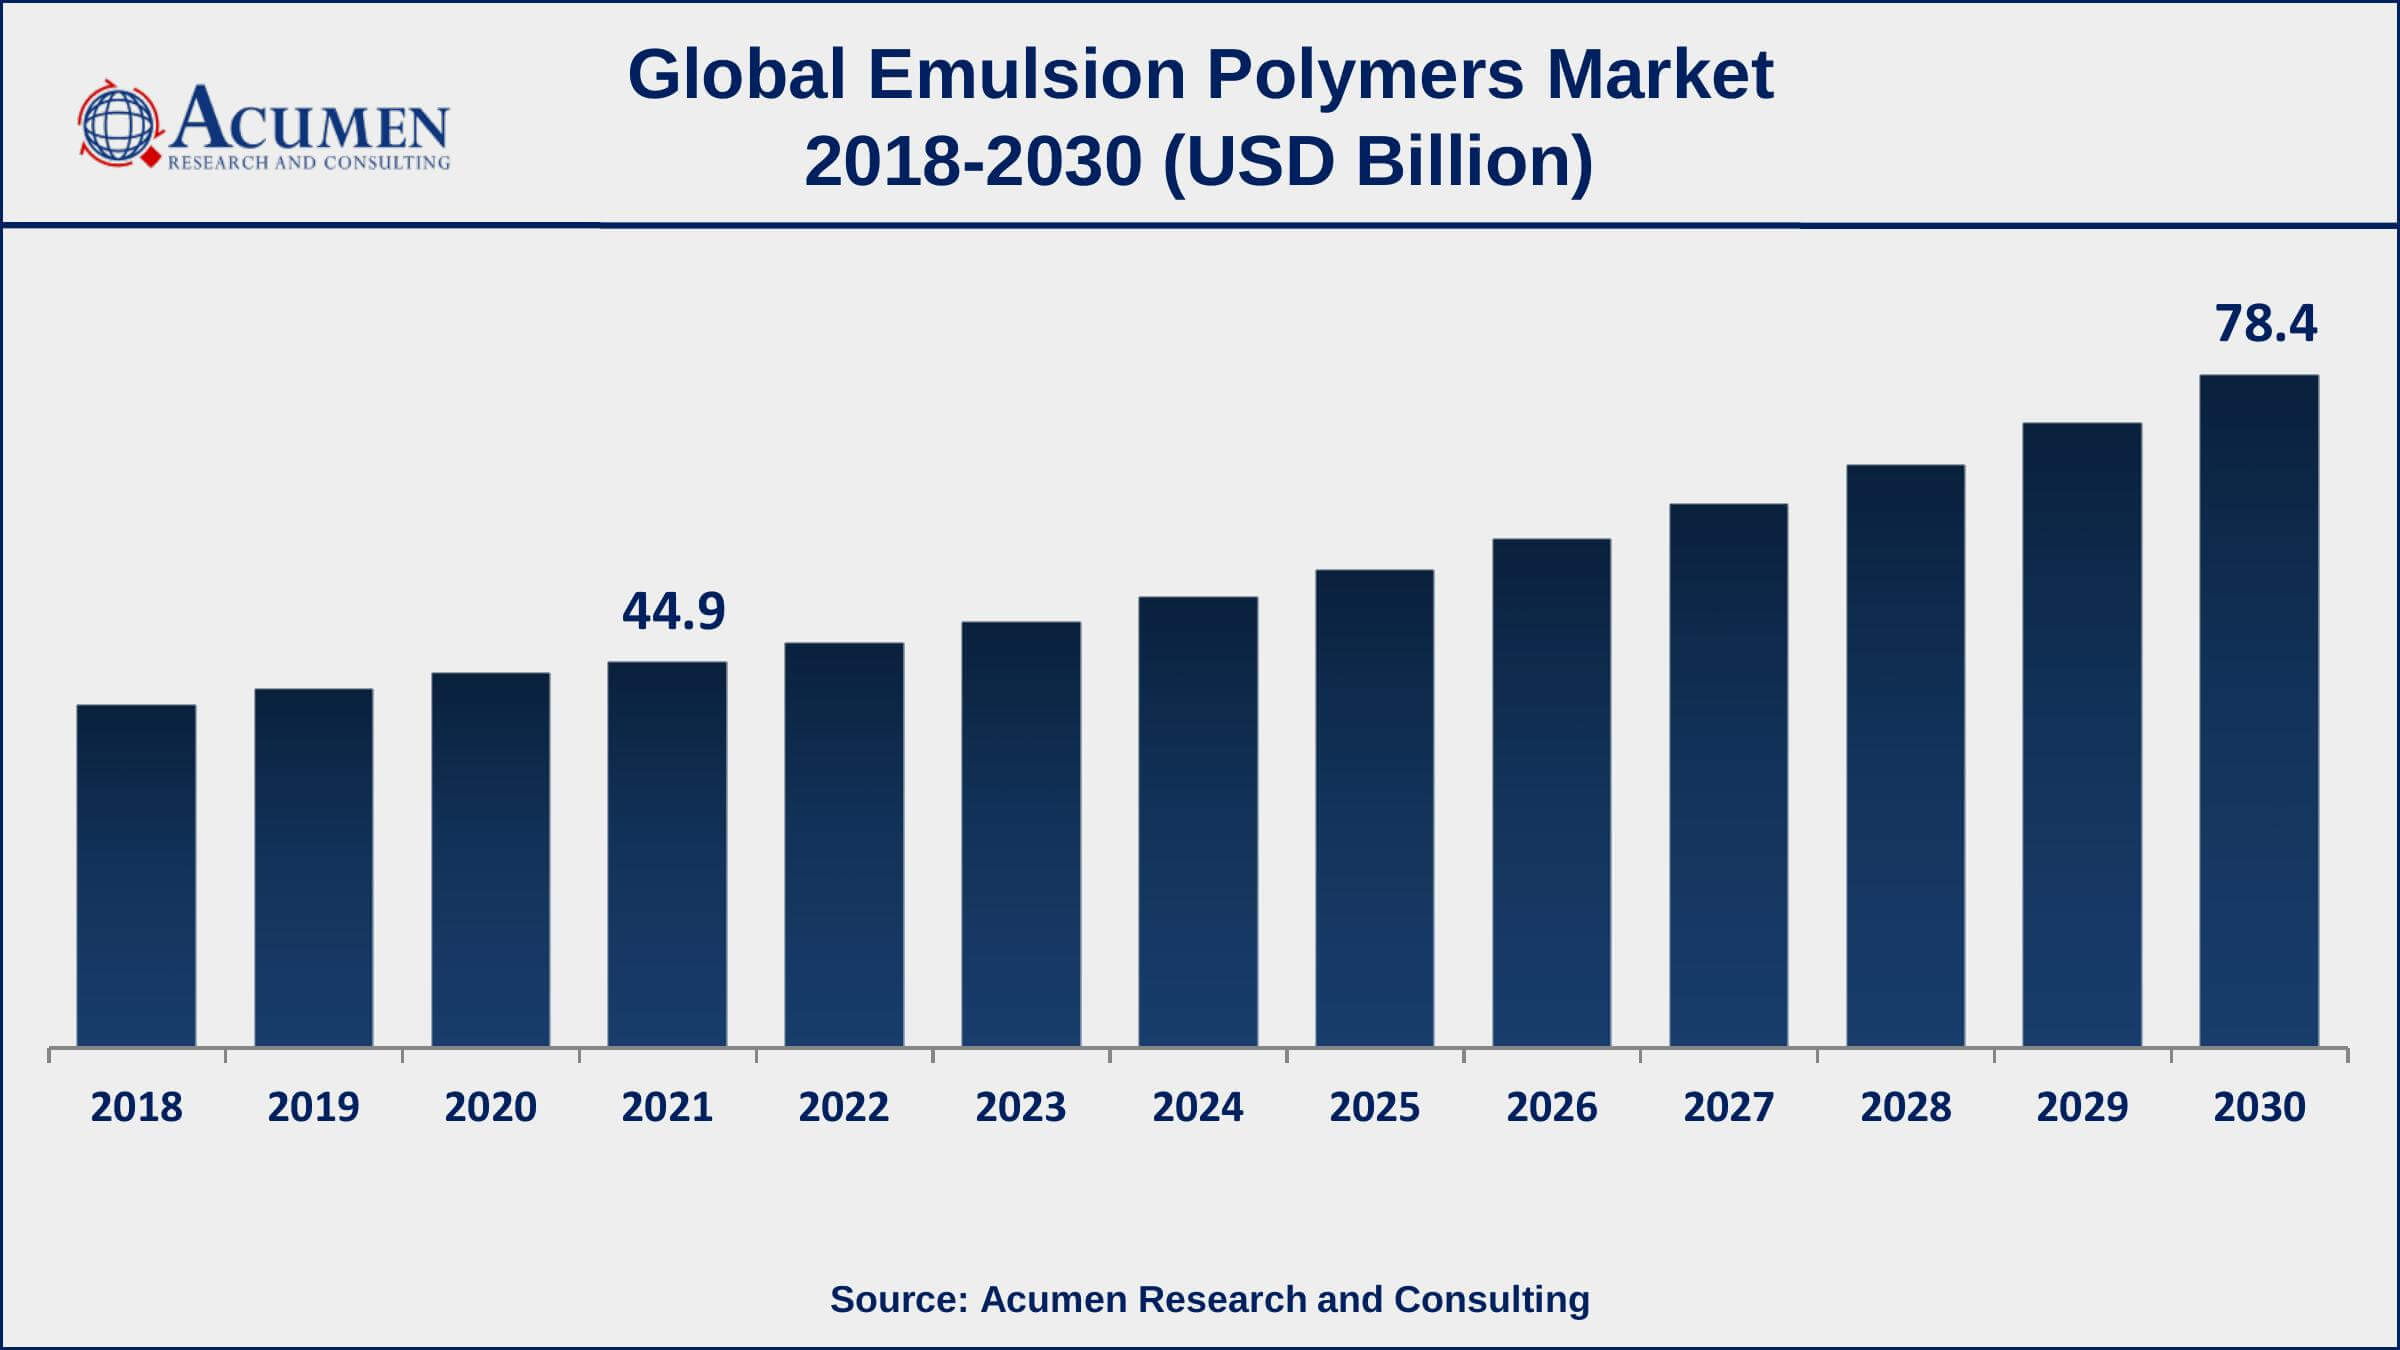 Europe emulsion polymers market growth will observe highest CAGR from 2022 to 2030